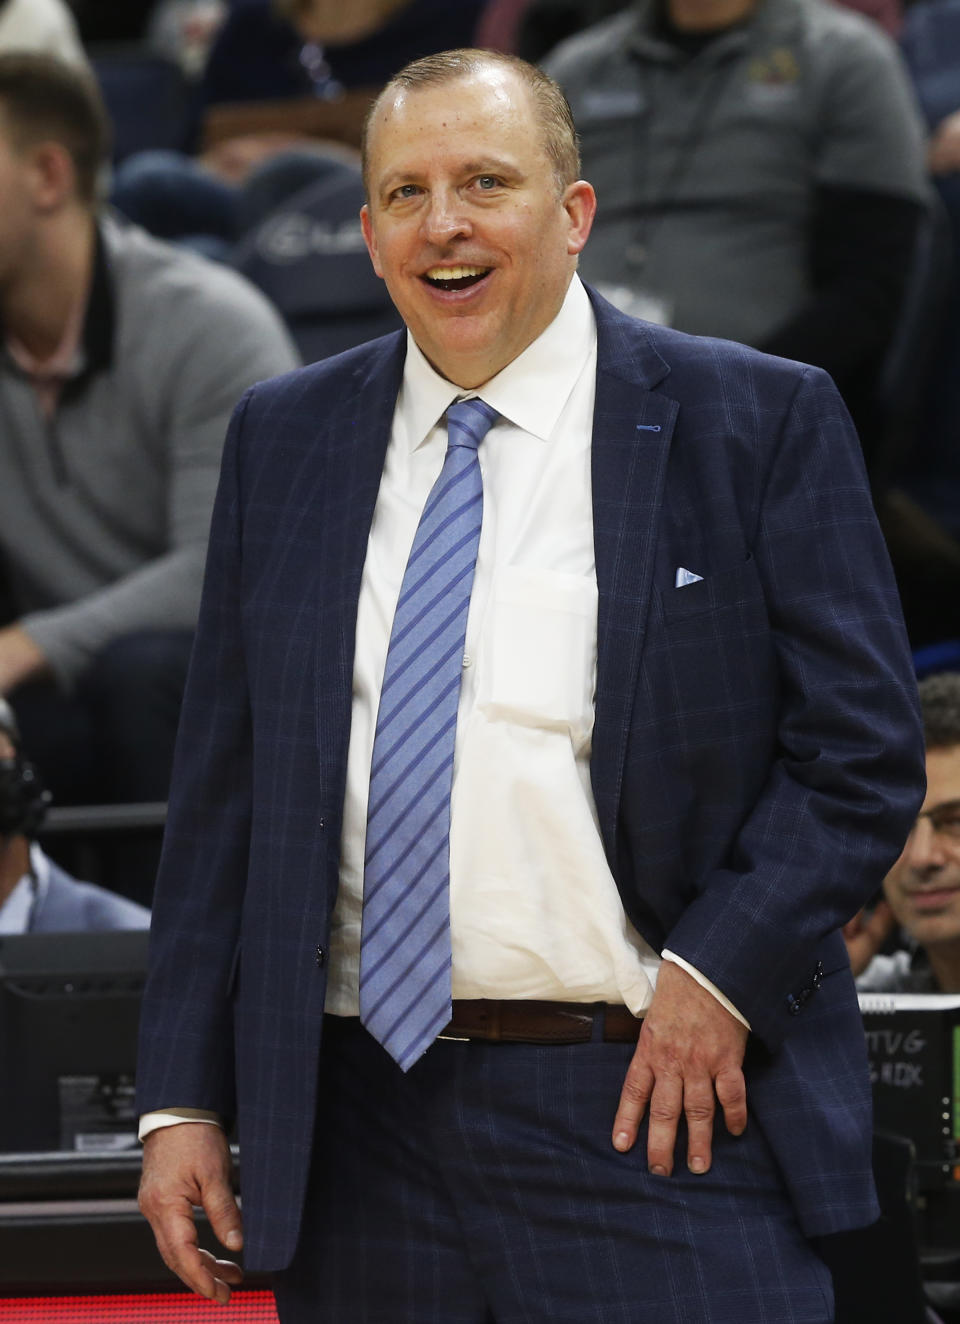 Minnesota Timberwolves head coach Tom Thibodeau smiles in the waning moments as his team defeats the Orlando Magic in an NBA basketball game Friday, Jan. 4, 2019, in Minneapolis. (AP Photo/Jim Mone)